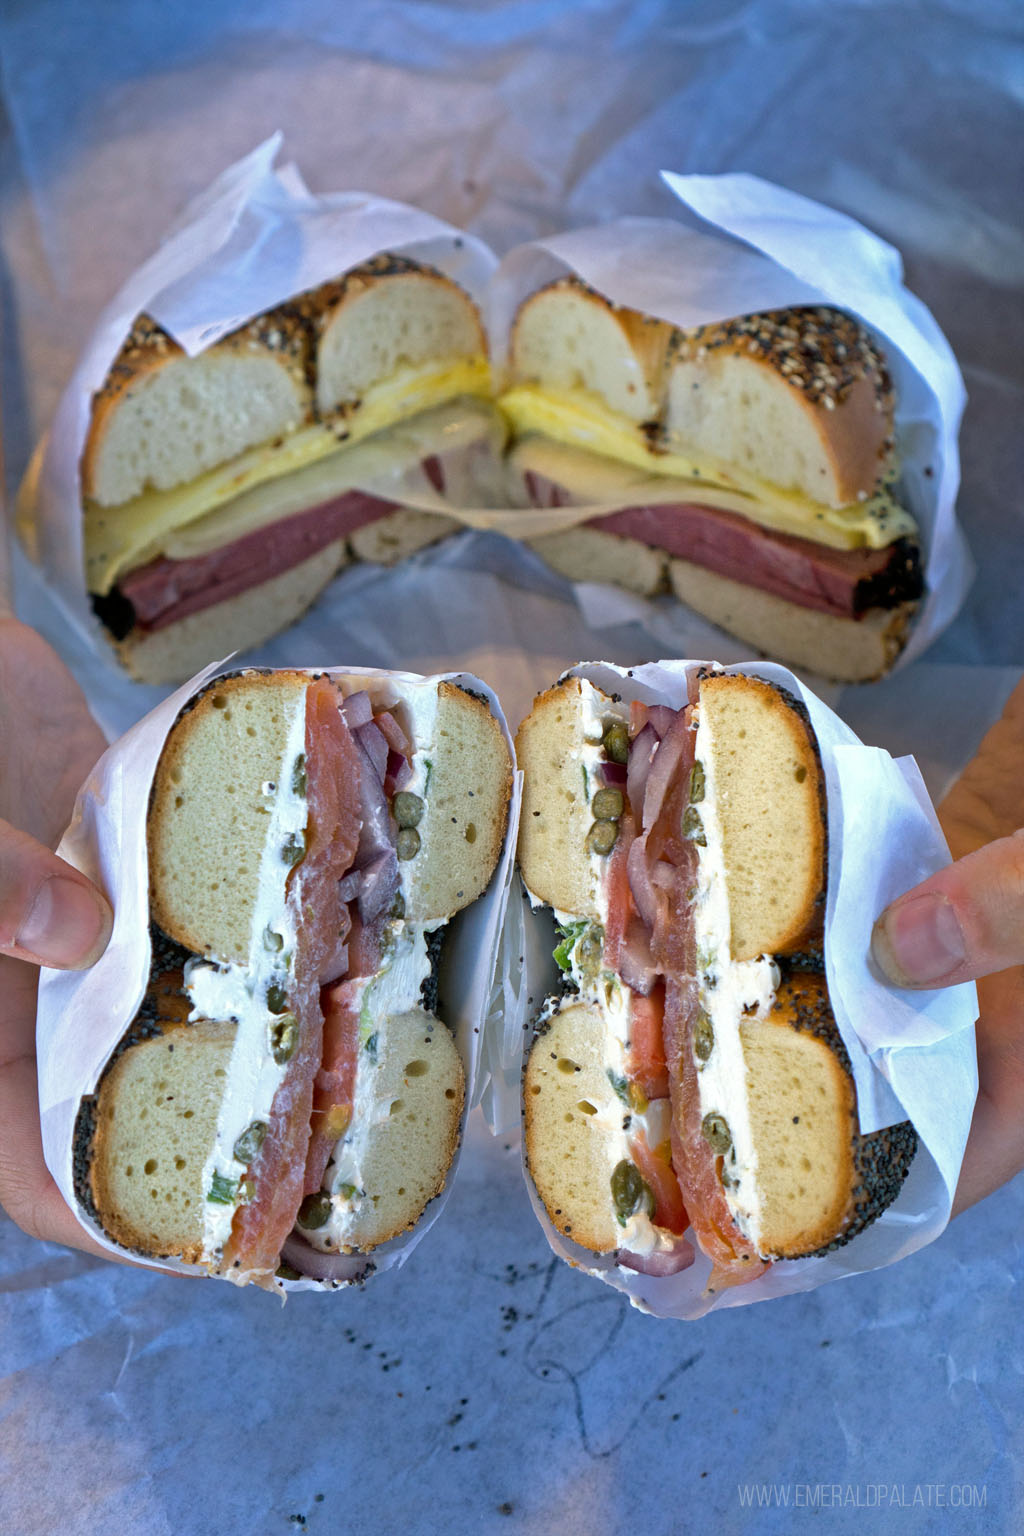 person pulling apart two halves of a bagel stuffed with lox and cream cheese